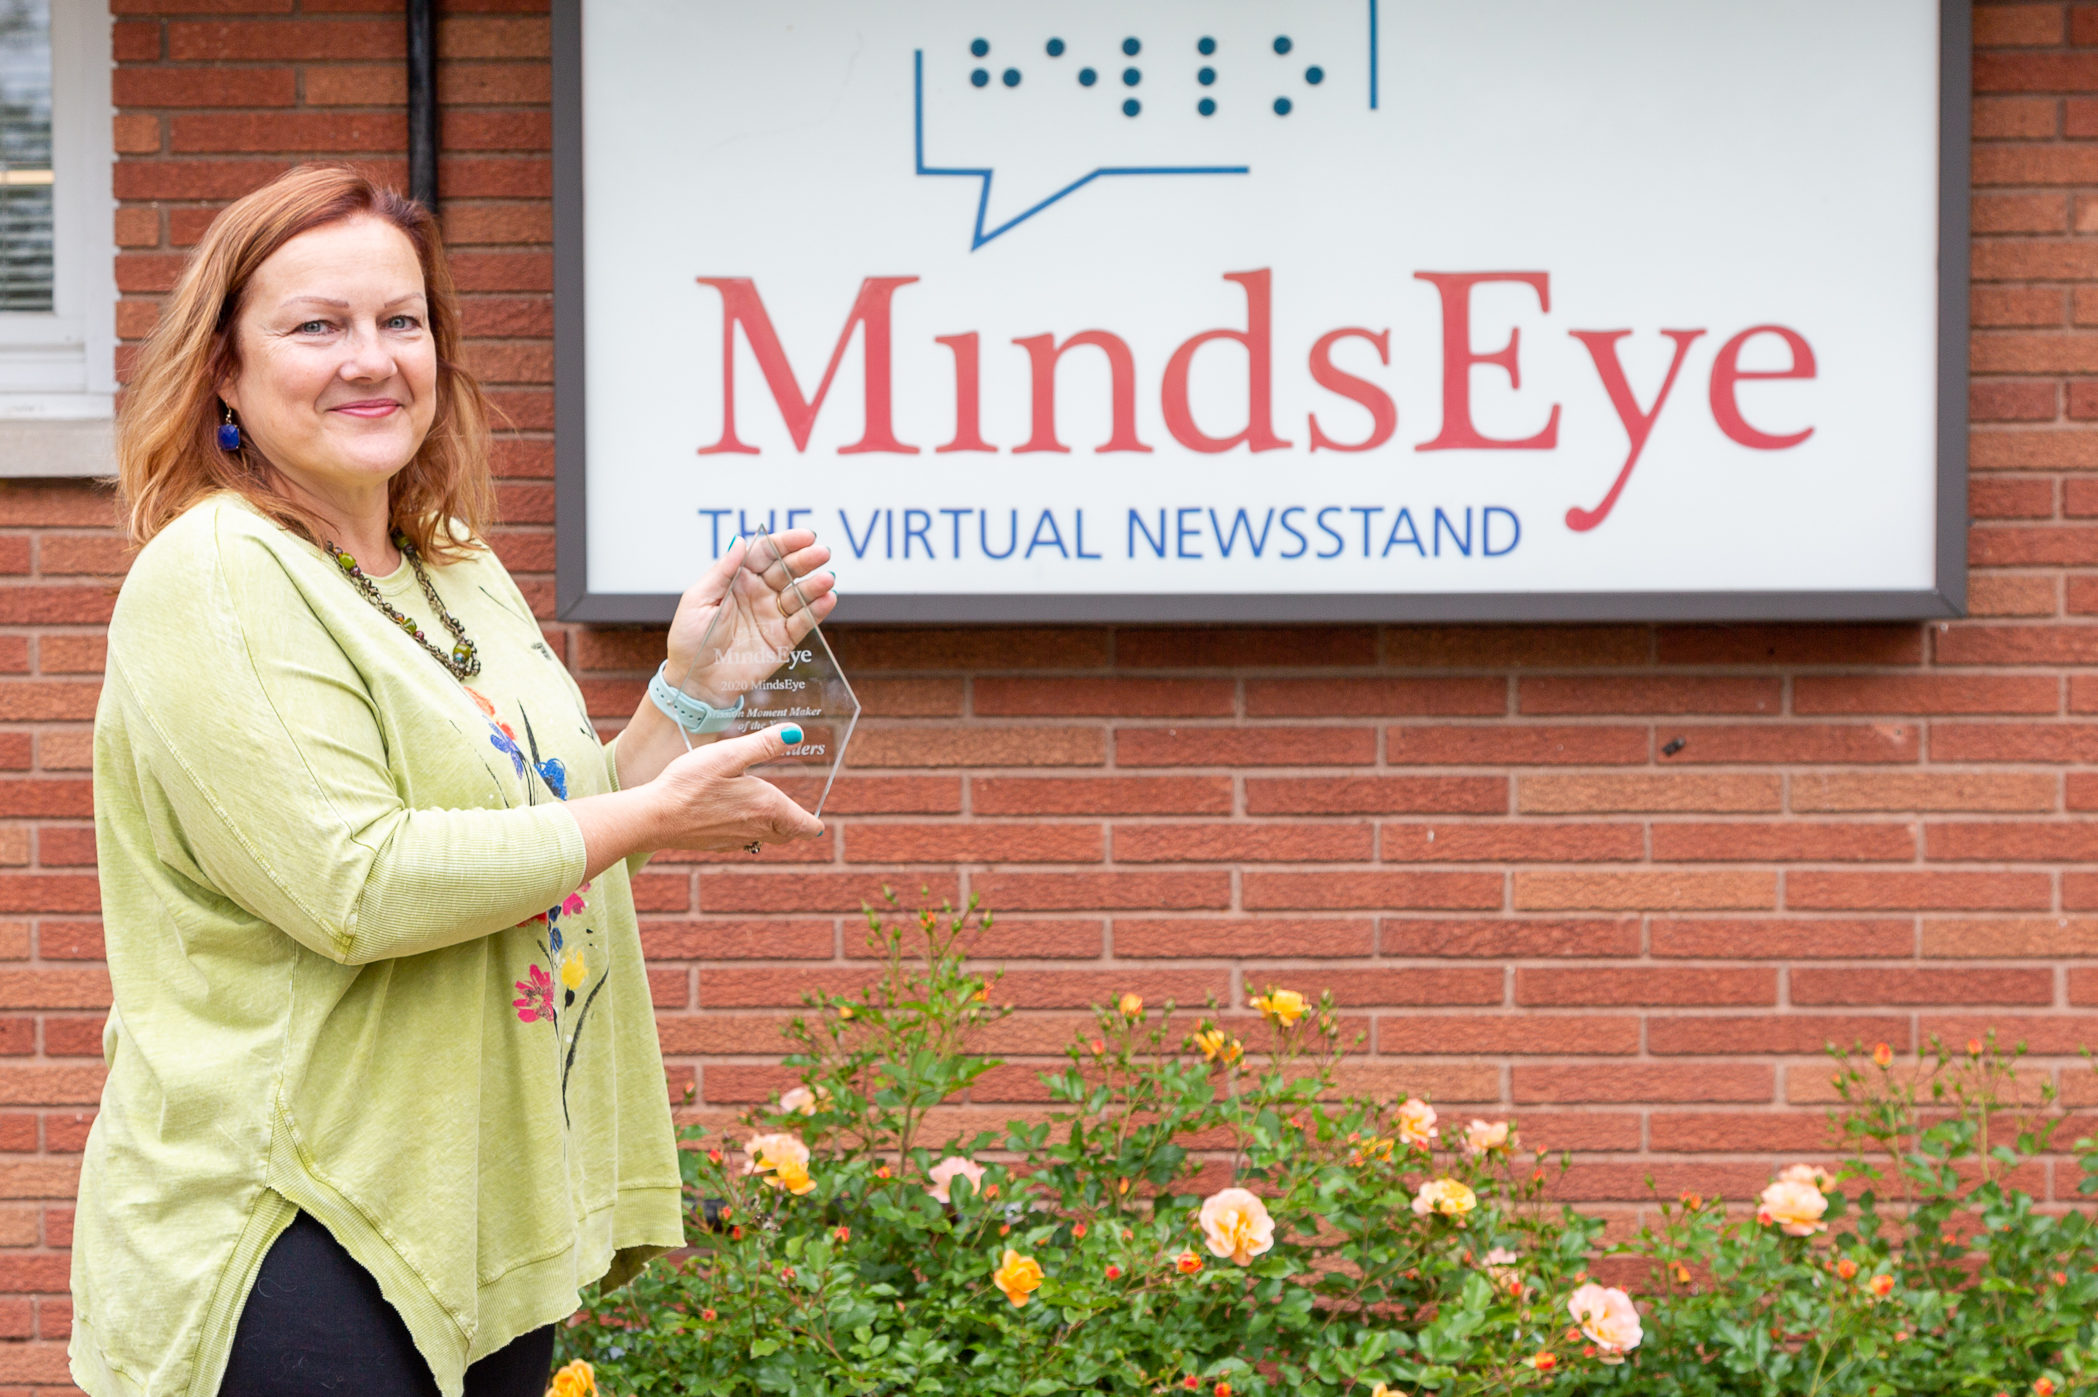 Marge Sanders holds her glass volunteer award and stands in front of the MindsEye studio.